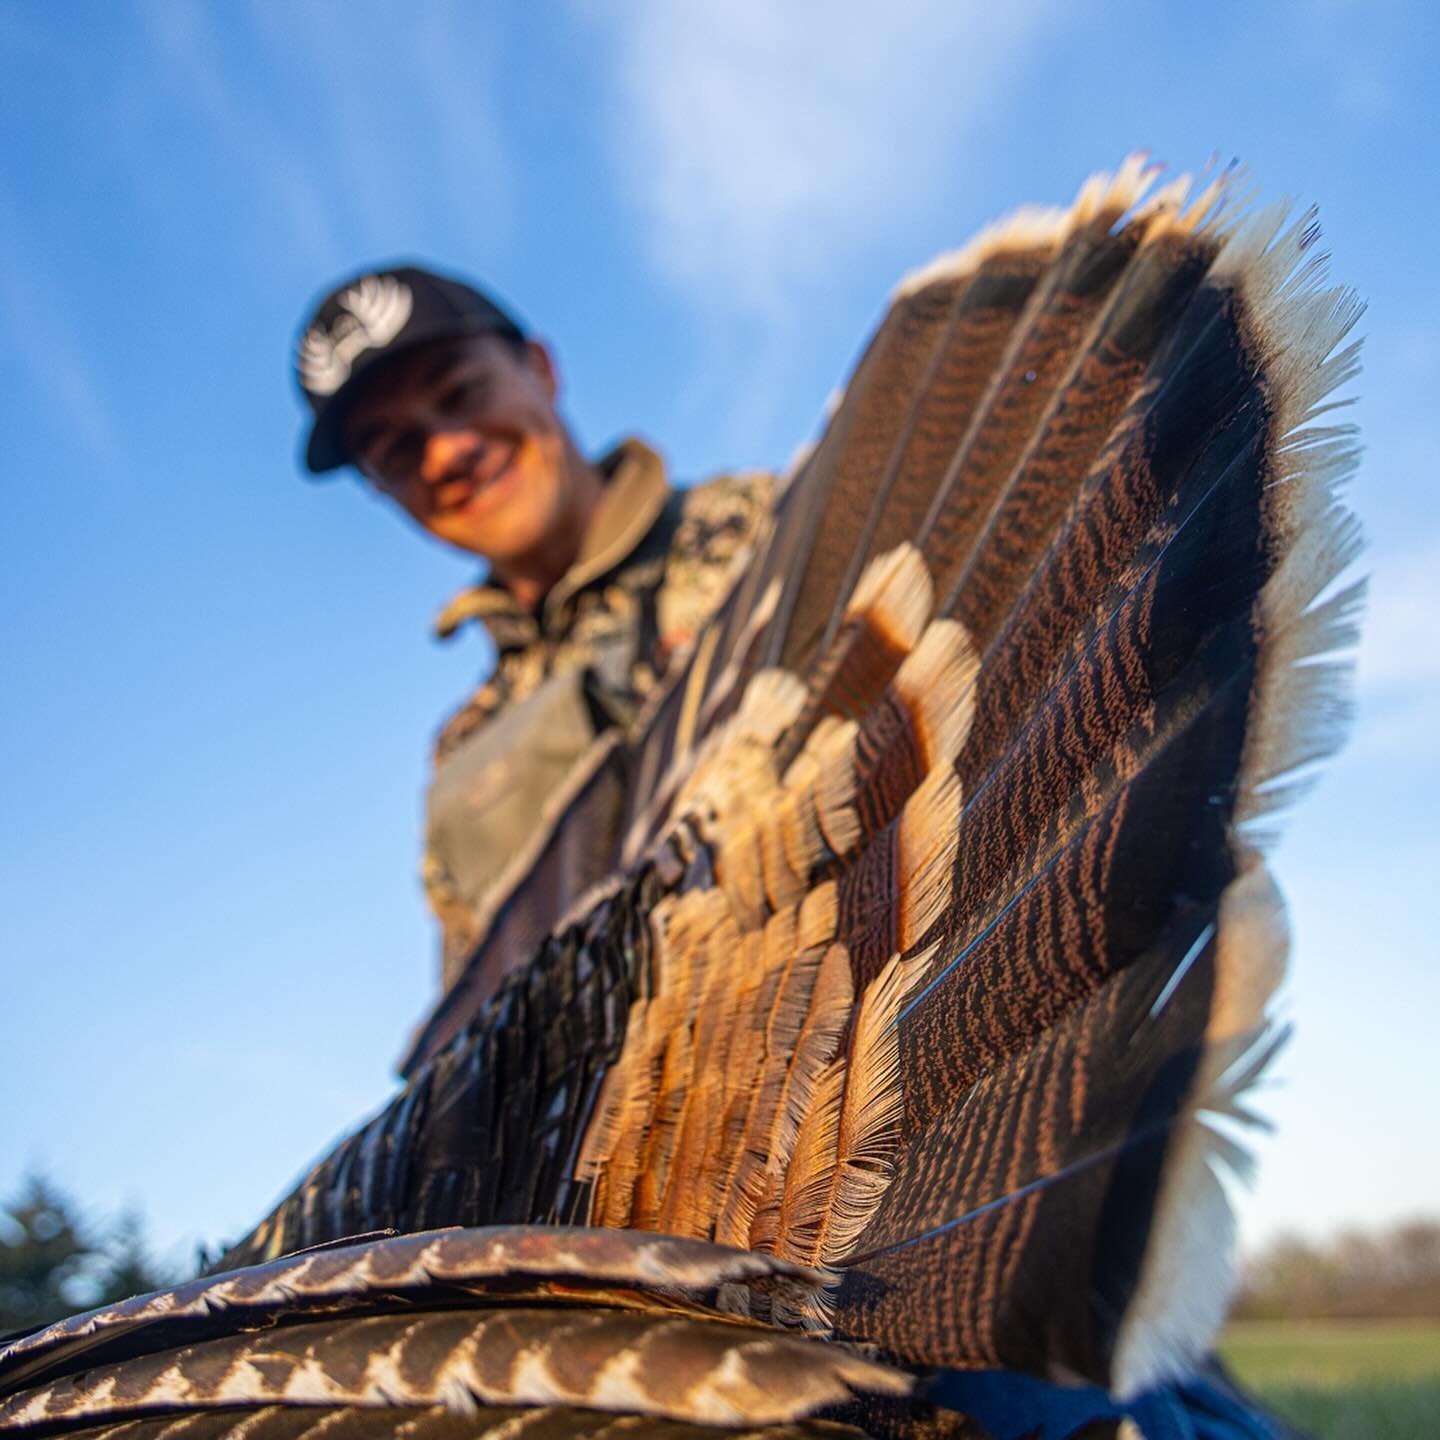 I&rsquo;m always thankful for the opportunity to hunt these birds every spring. The more I continue to hunt them, the more respect I have for them. Growing up in a turkey rich environment, I couldn&rsquo;t imagine anything different. Over these last 